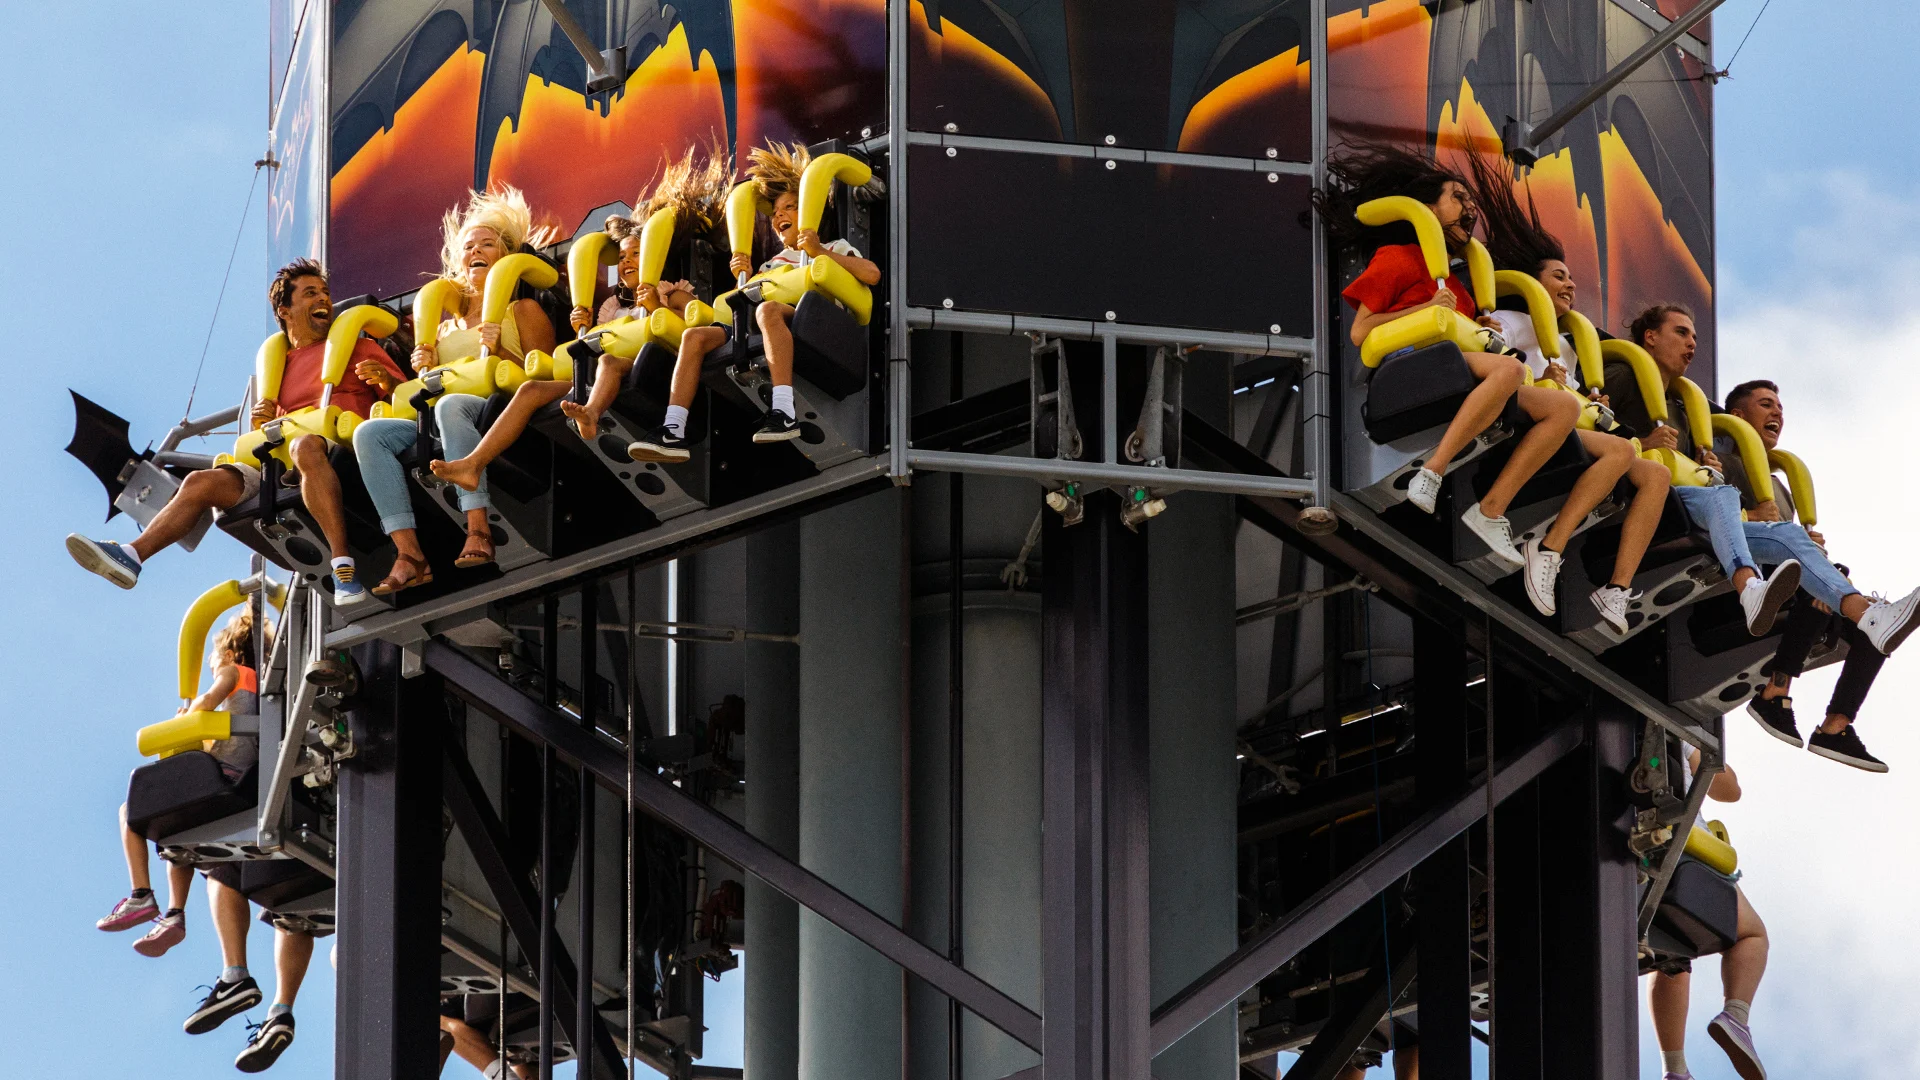 Riders experiencing the exhilarating descent on the BATWING Spaceshot ride at Warner Bros. Movie World, with a backdrop of blue sky and the thrill of free-fall excitement